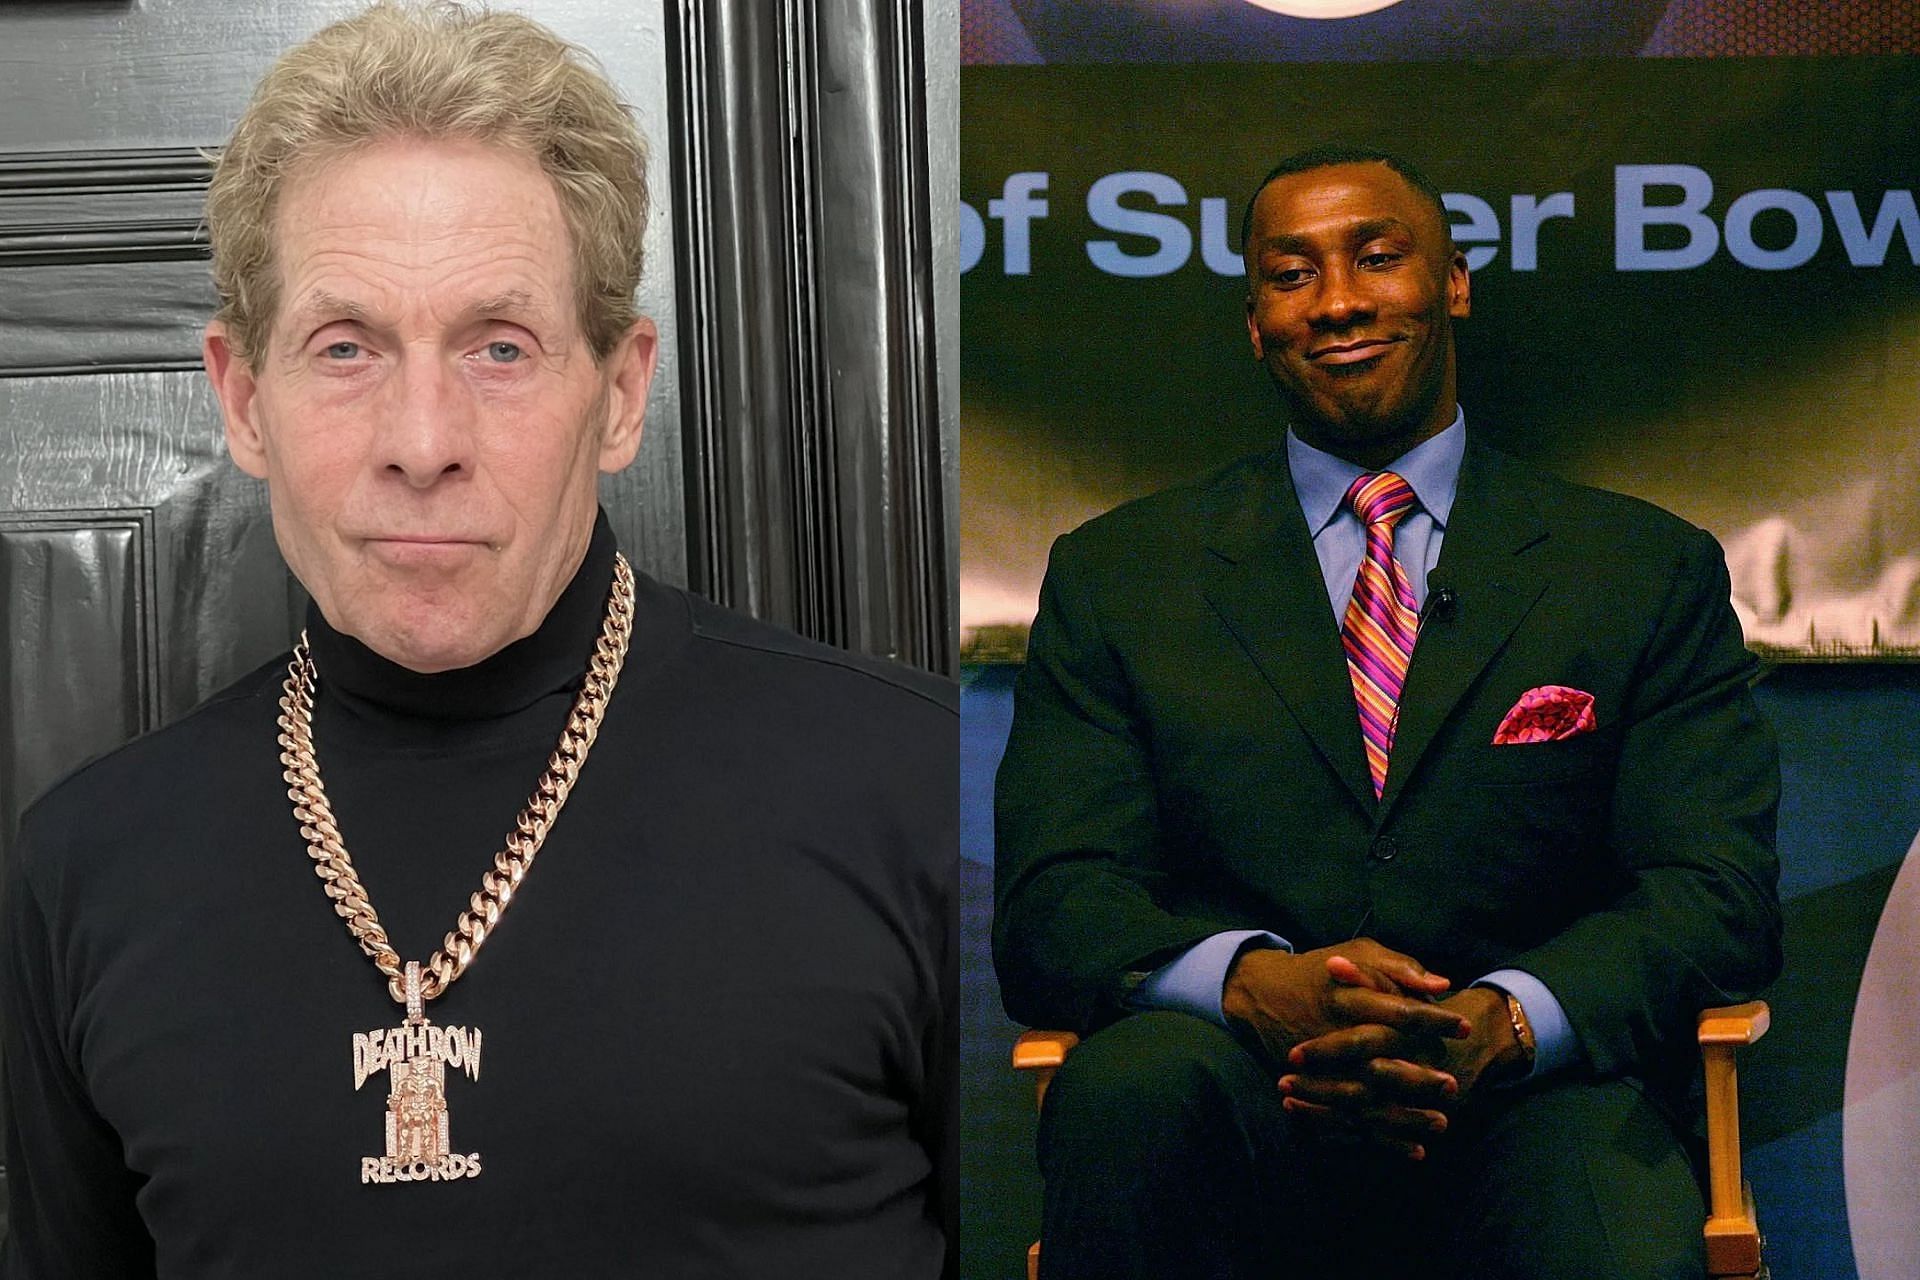 Skip Bayless (L) and Shannon Sharpe (R) (Pic Courtesy: Getty and Twitter @RealSkipBayless)